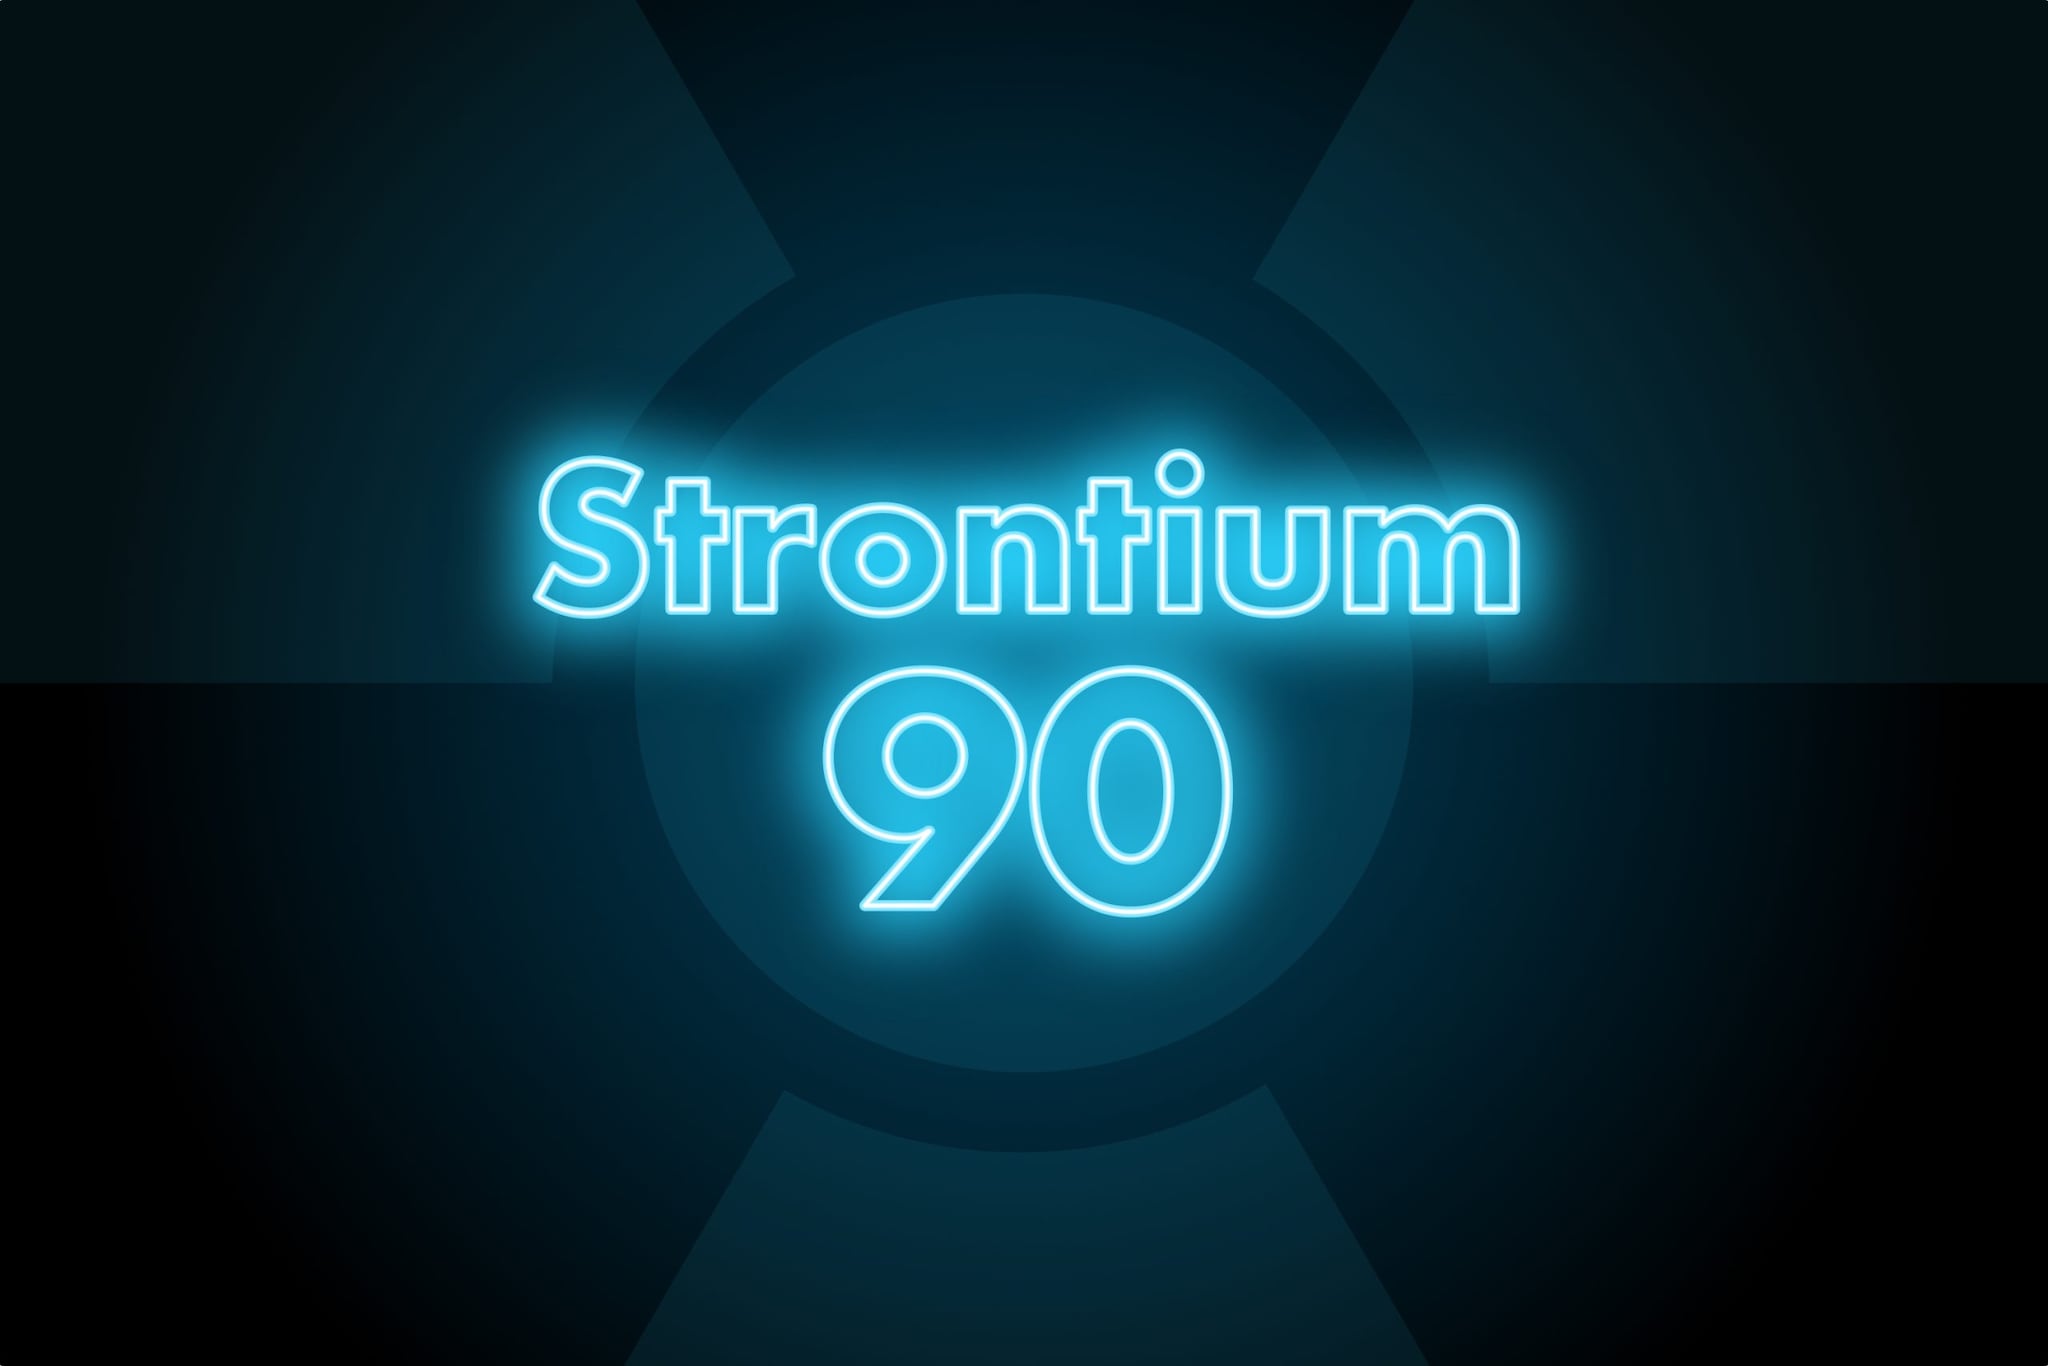 Graphic displaying the word "Strontium 90" in neon blue font